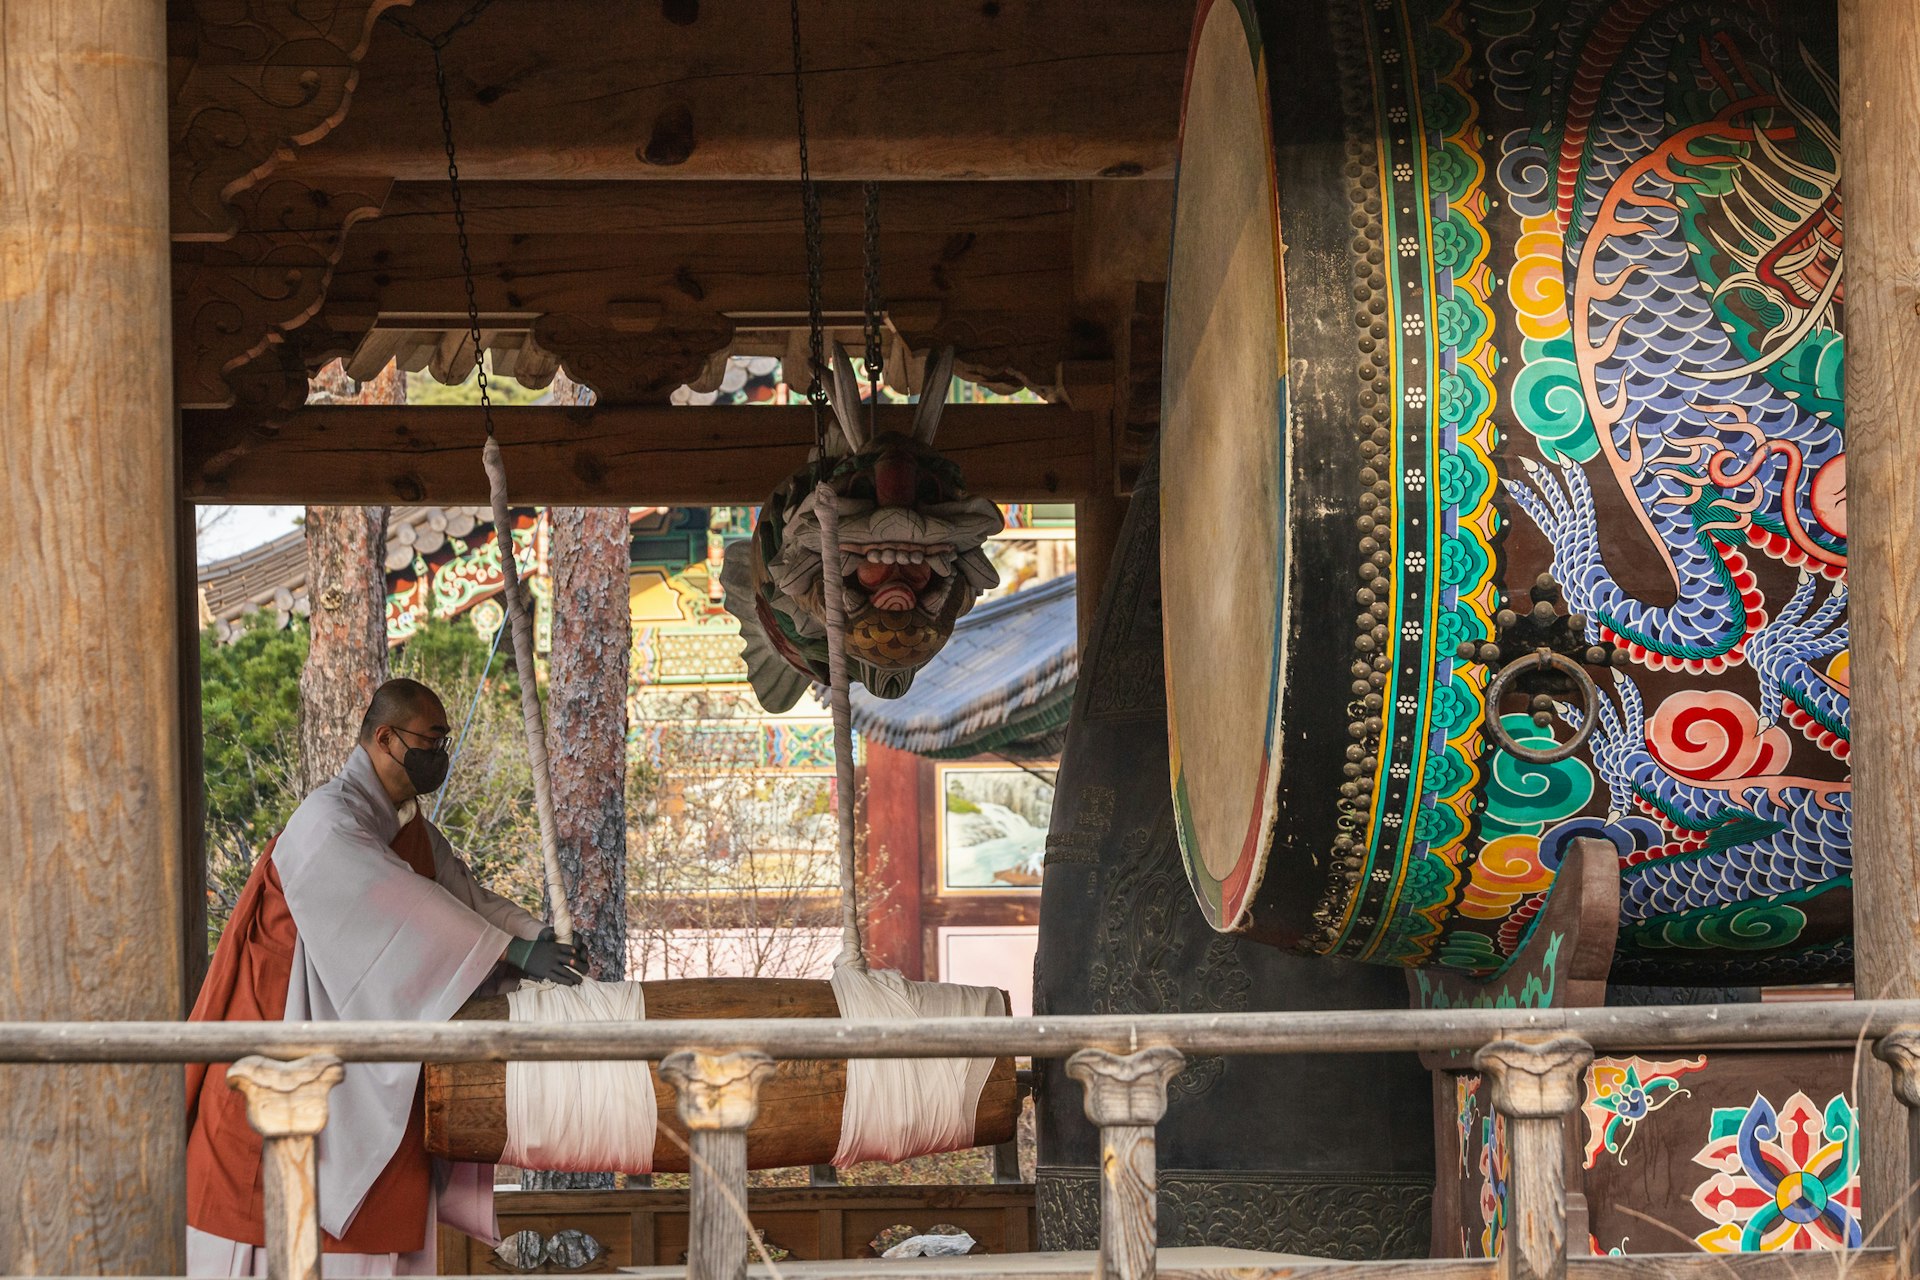 A Buddhist monk in traditional attire and a face mask stands inside a temple pavilion, striking a large, ornate hanging drum with a mallet. The drum is adorned with intricate patterns, and beside it, part of a colorful mural with a dragon motif is visible, showcasing the rich artistic heritage of the temple. The pavilion's architecture, with its wooden beams and decorative elements, reflects the traditional Korean style. The atmosphere is one of solemnity and cultural significance.